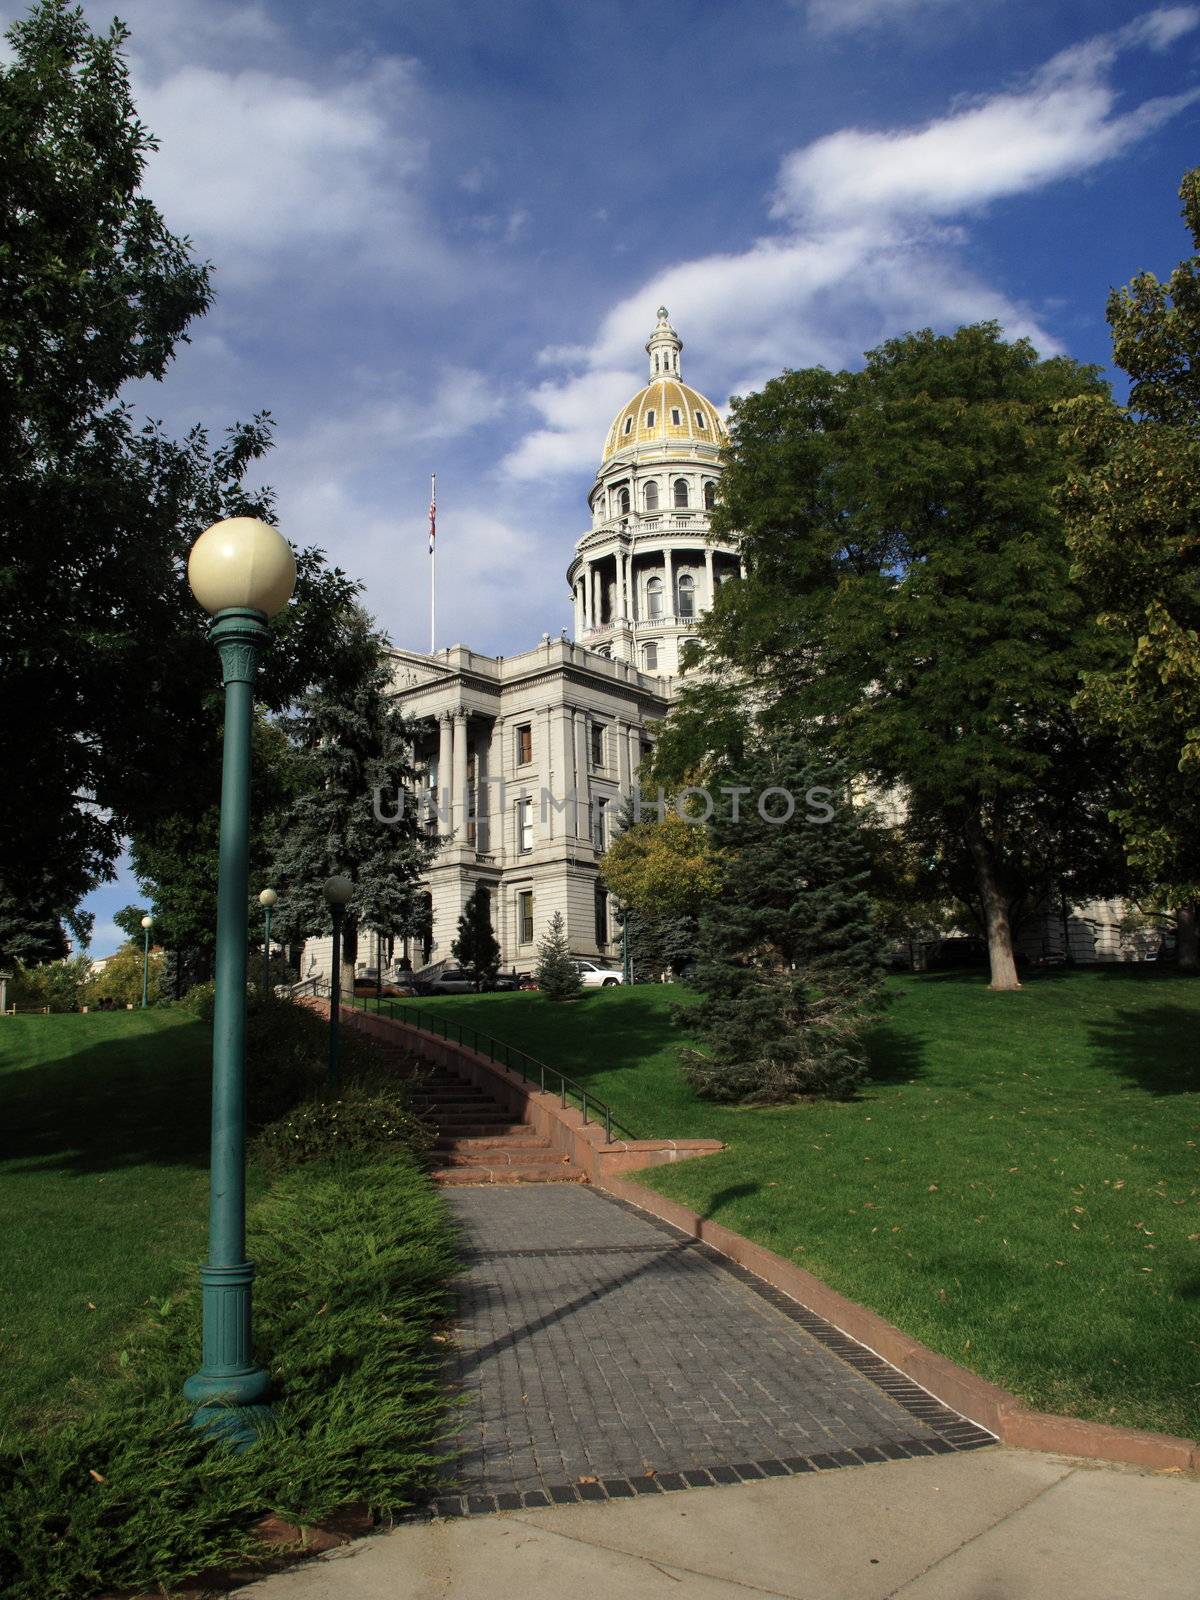 Colorado State Capitol Building in Denver by Ffooter